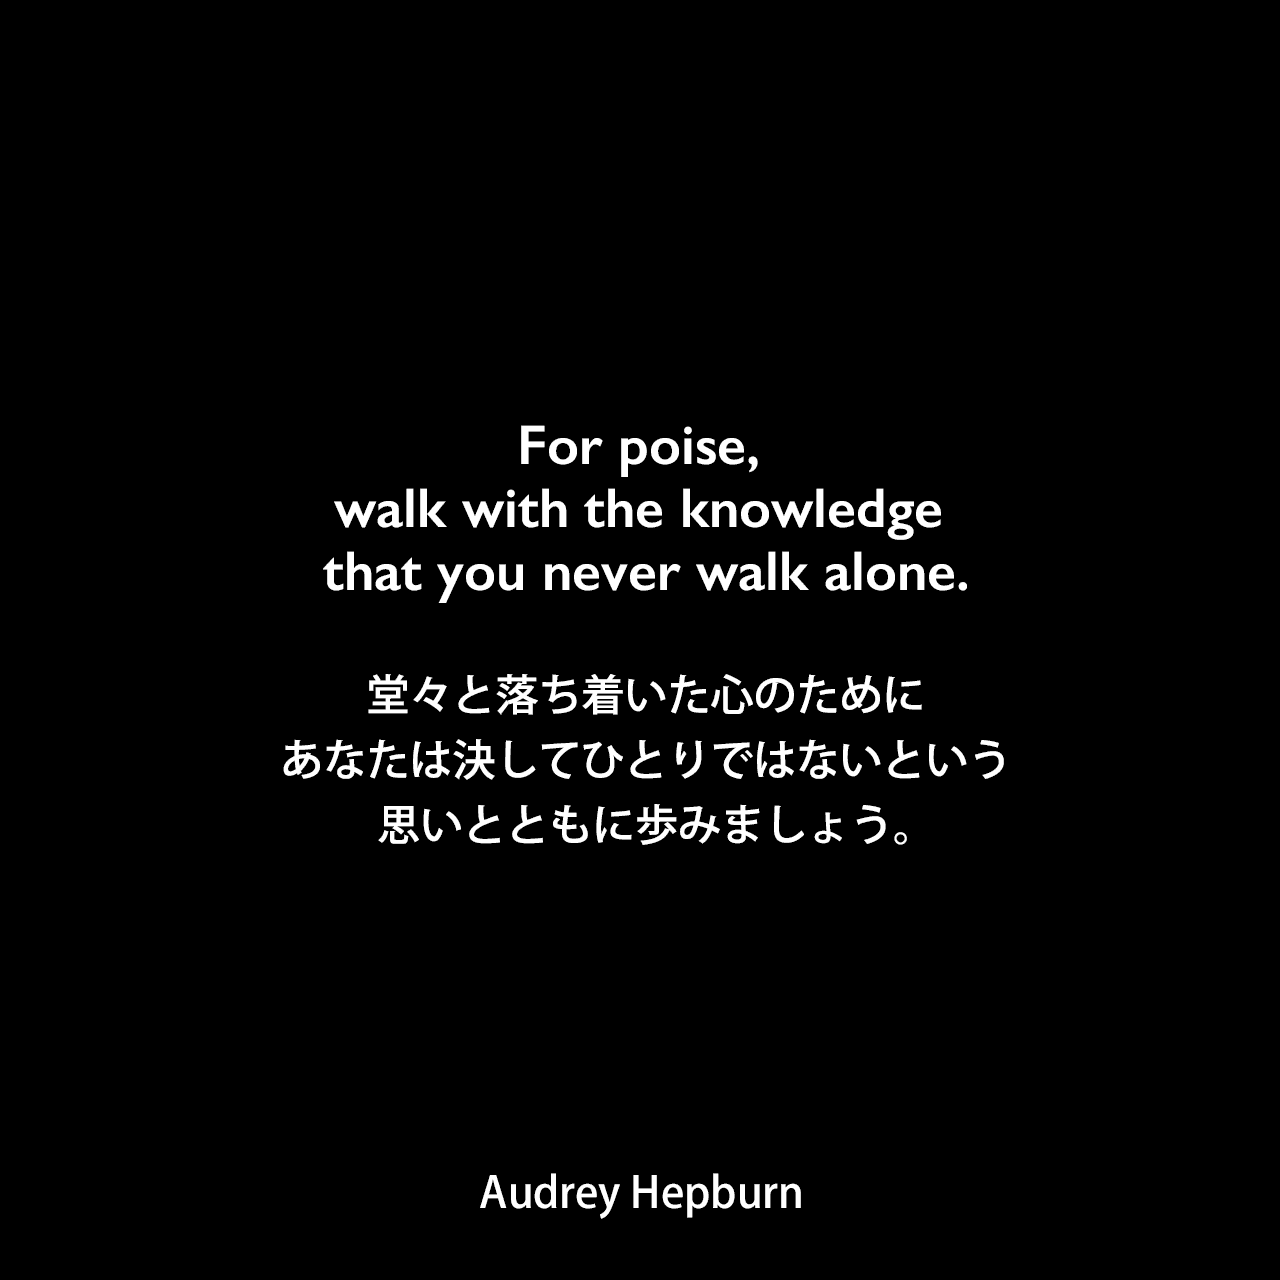 For poise, walk with the knowledge that you never walk alone.堂々と落ち着いた心のために、あなたは決してひとりではないという思いとともに歩みましょう。Audrey Hepburn